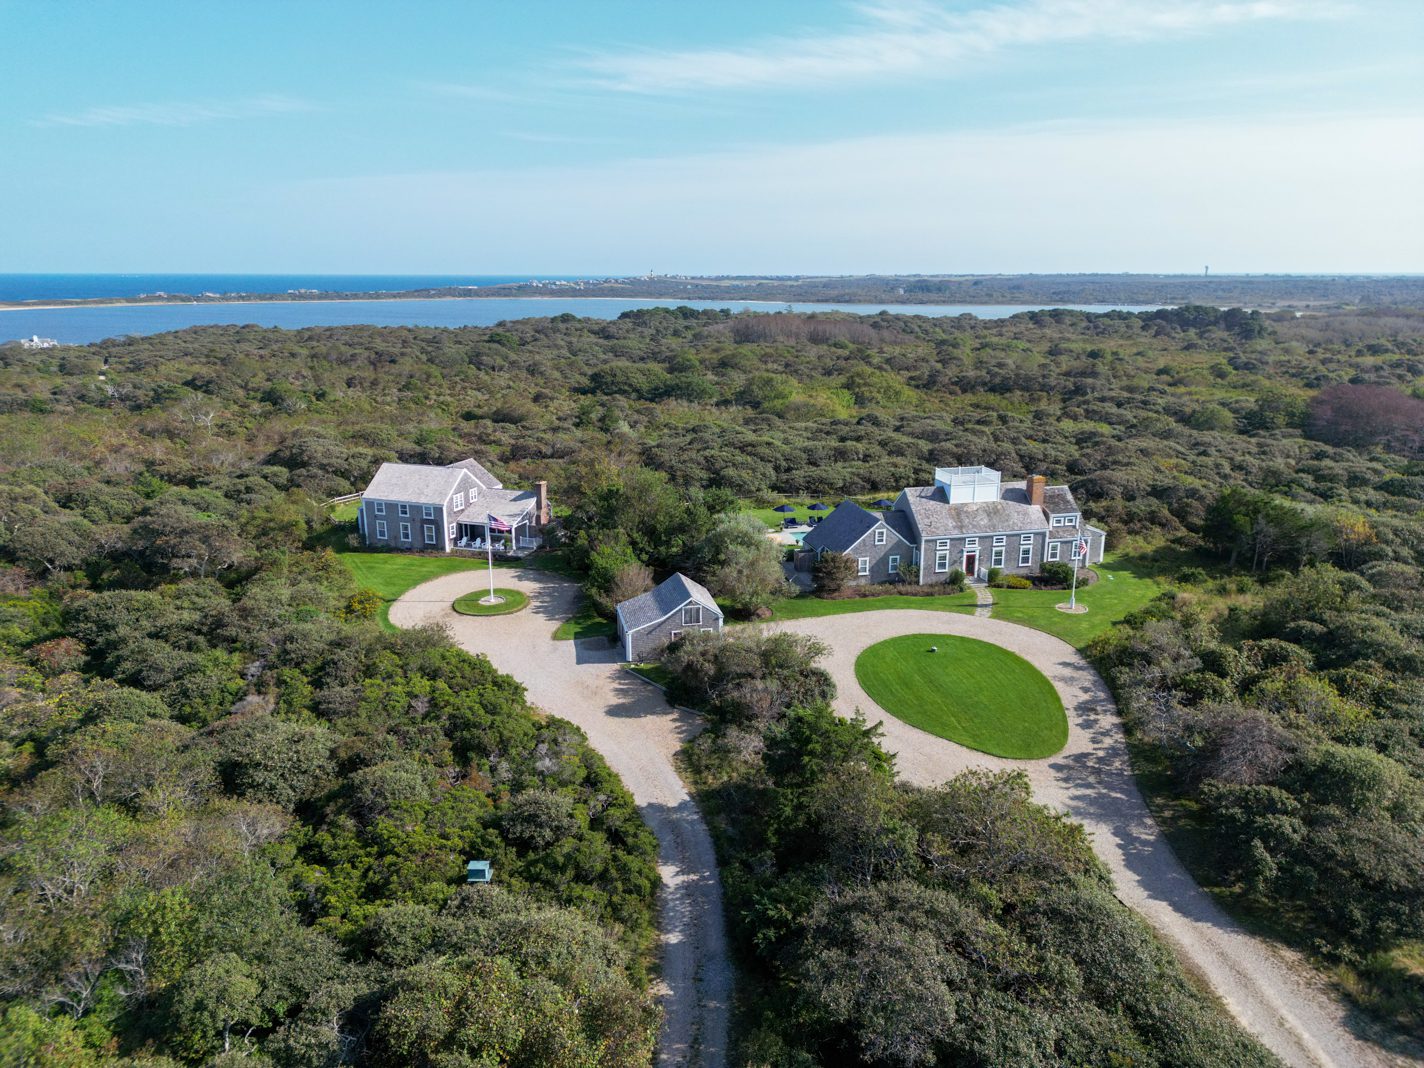 3-21 Quidnet Rd Nantucket Family Compound Tennis Pool Pickleball